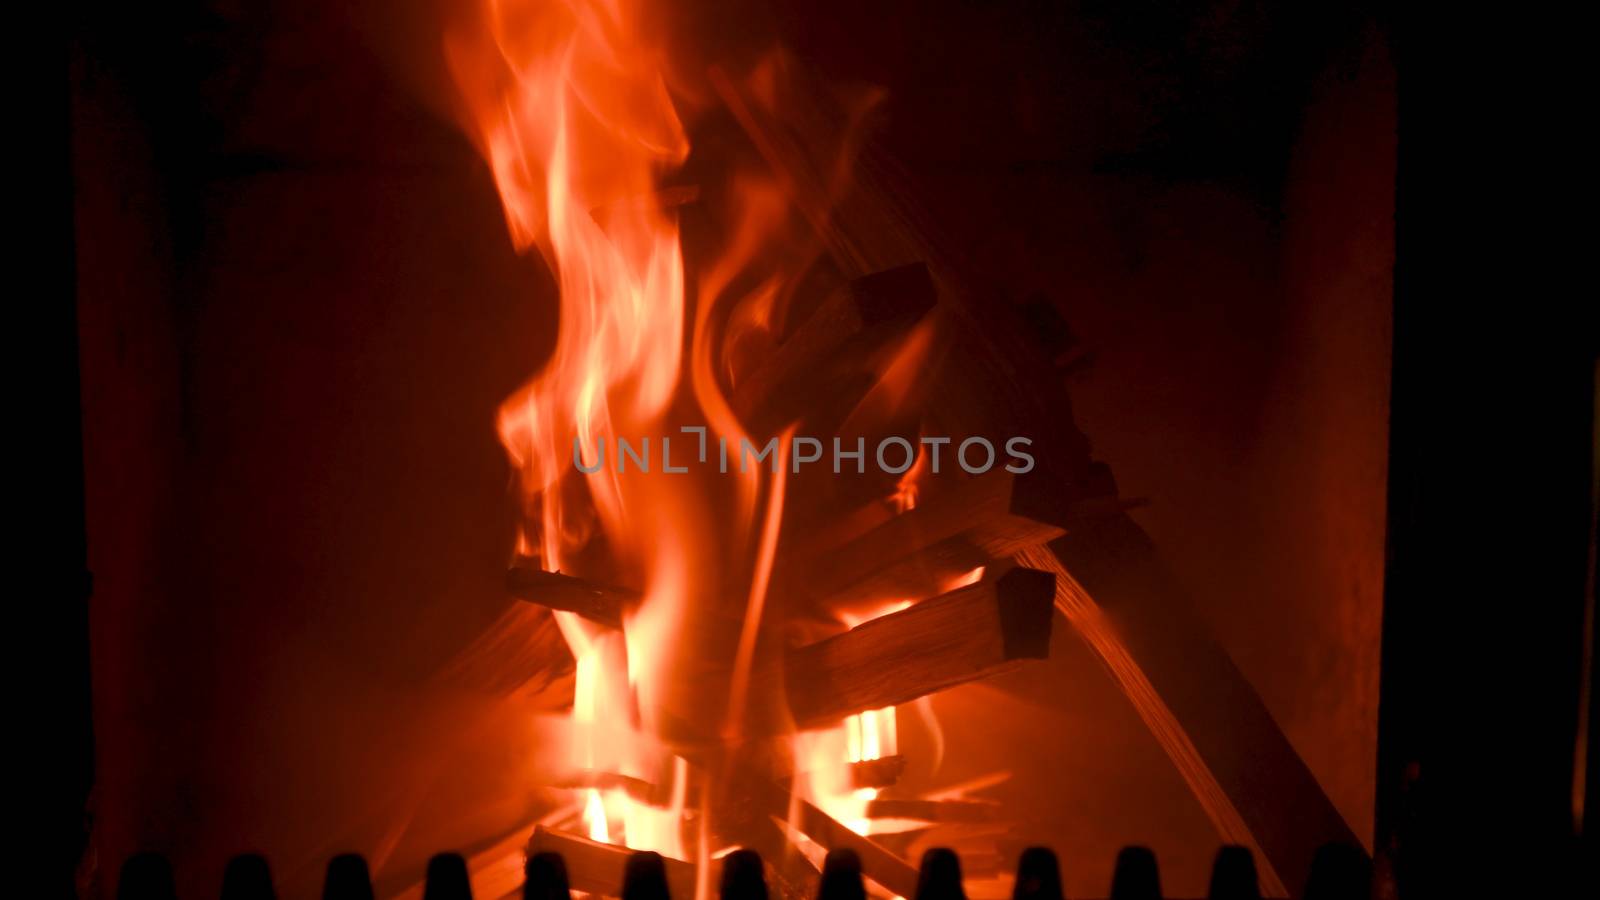 Fire in stove, close up, firewood burning by asafaric